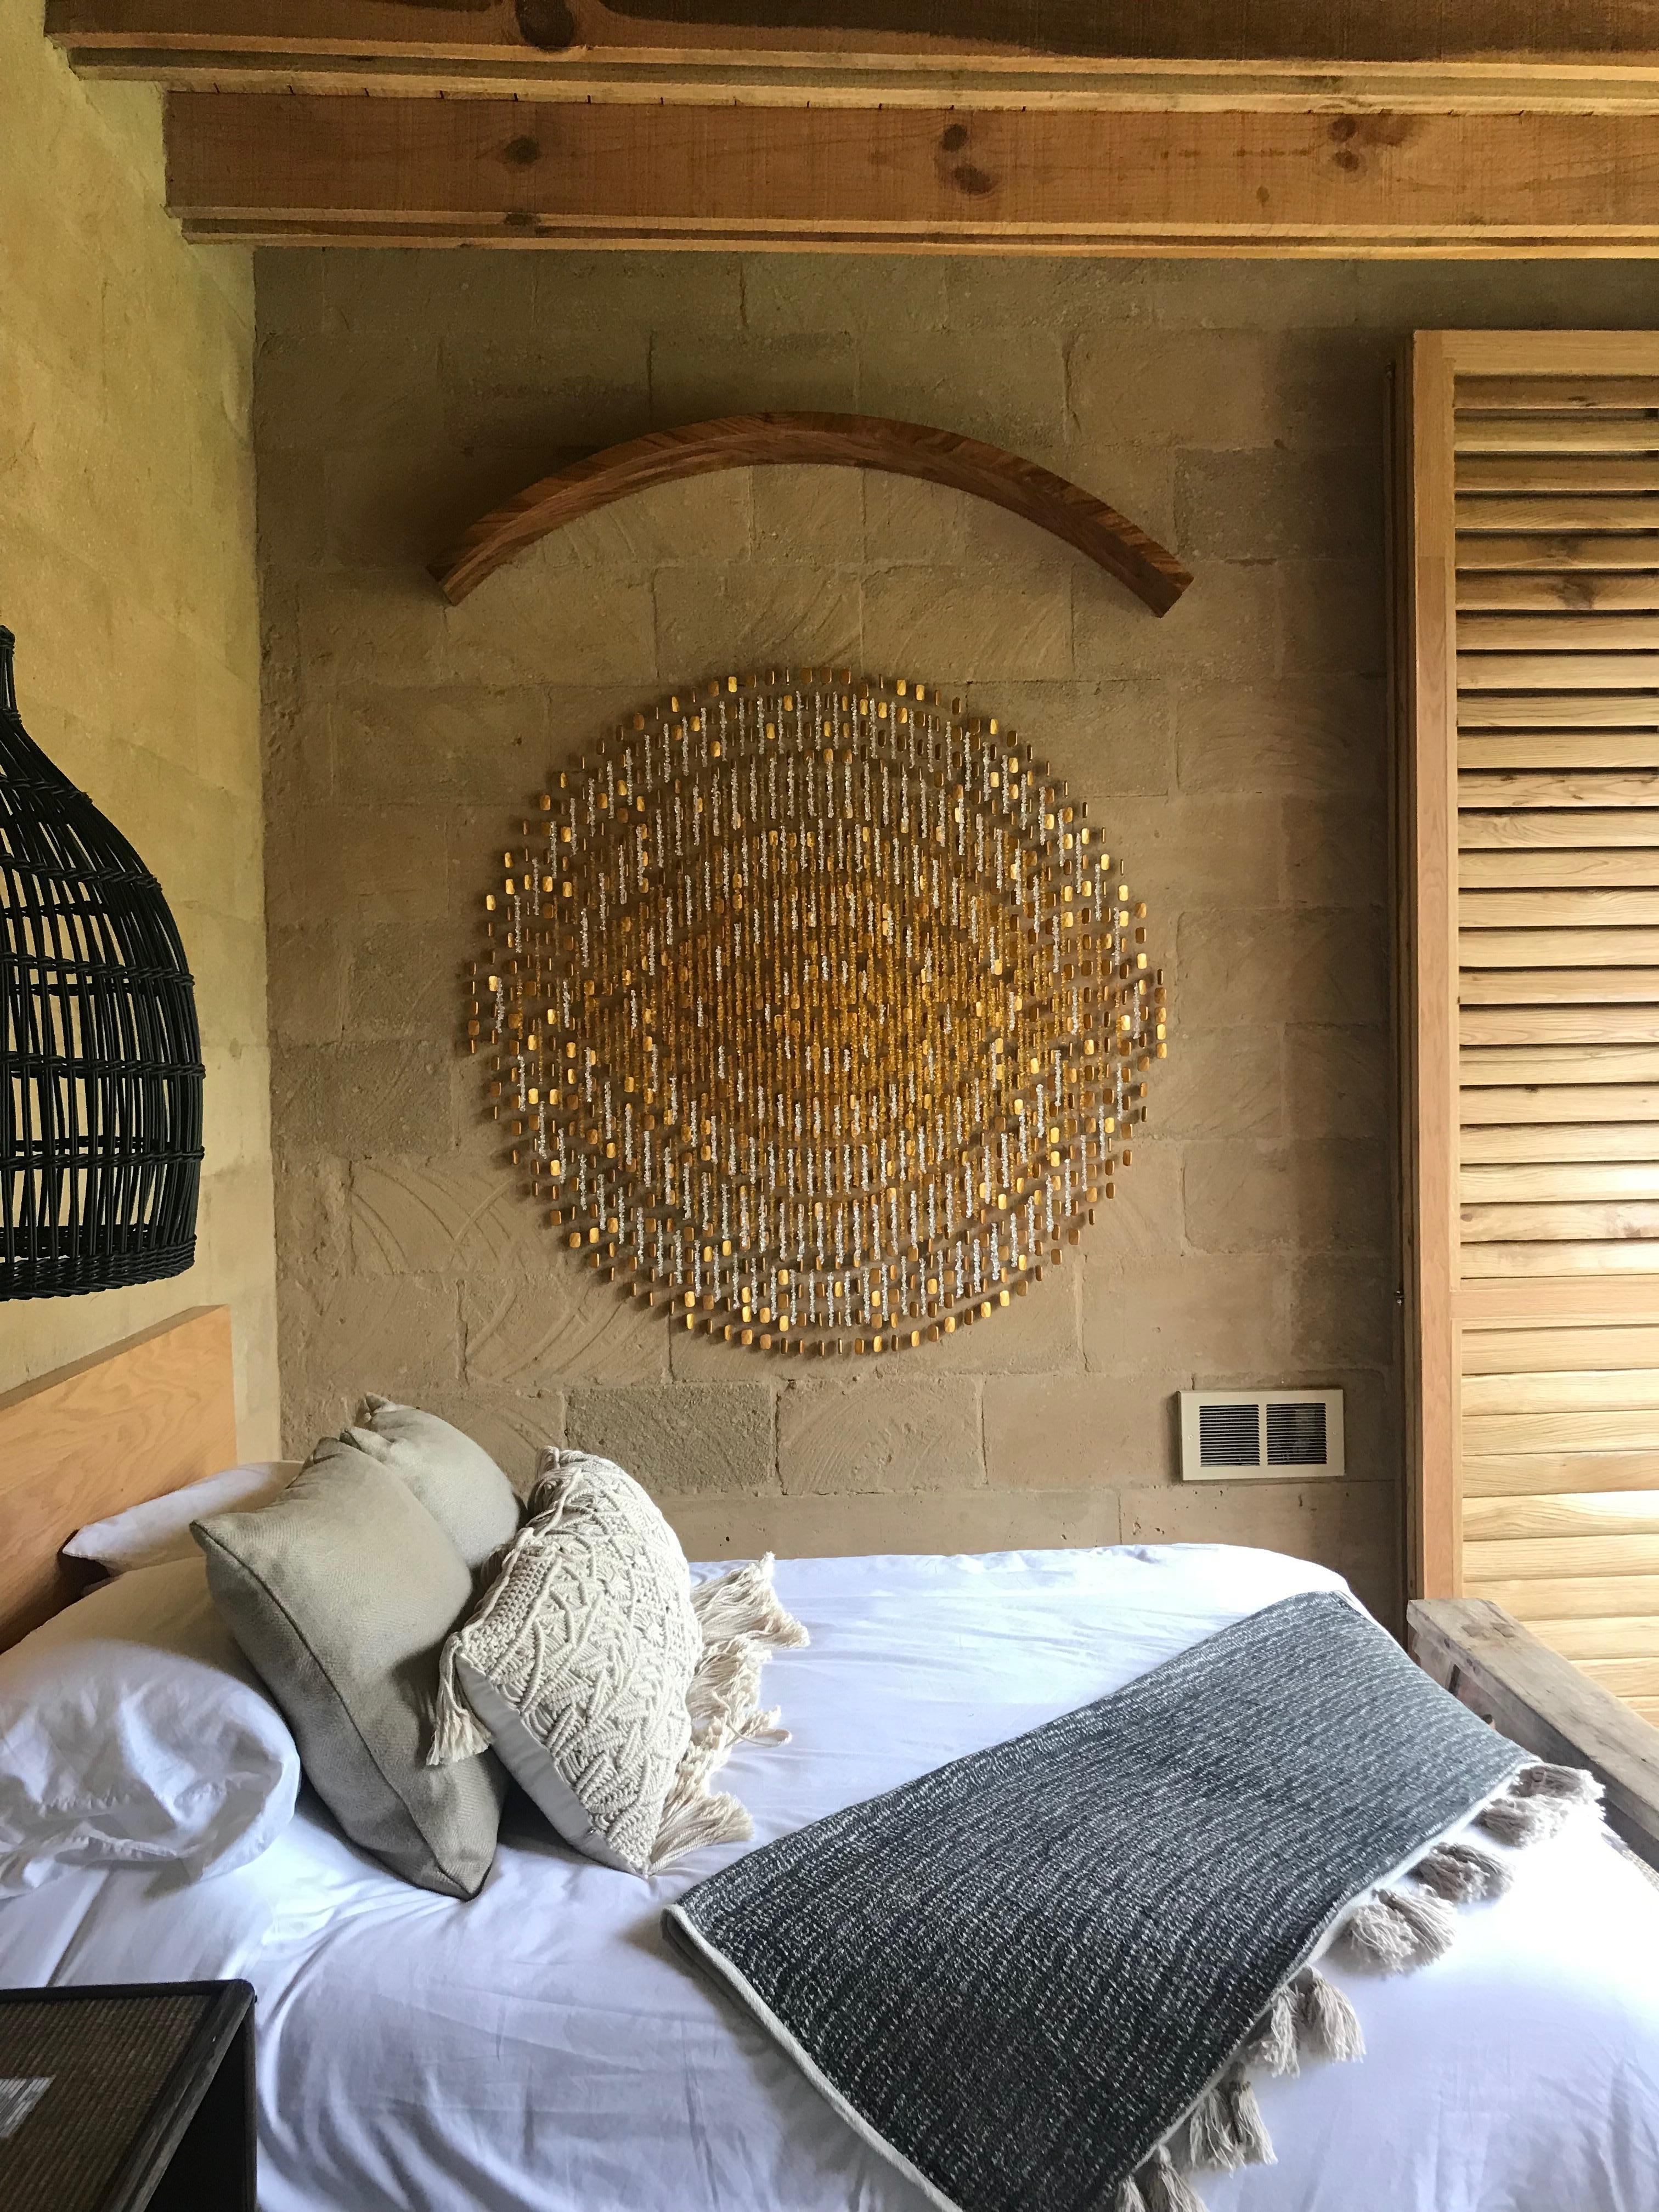 This is an outstanding piece, all handmade in the heart of Mexico City. The solid-tropical-wood-curve base on the top frames the circumferences perfectly. It definitely transmits elegance and tranquility. Each circle is concentric to the next and